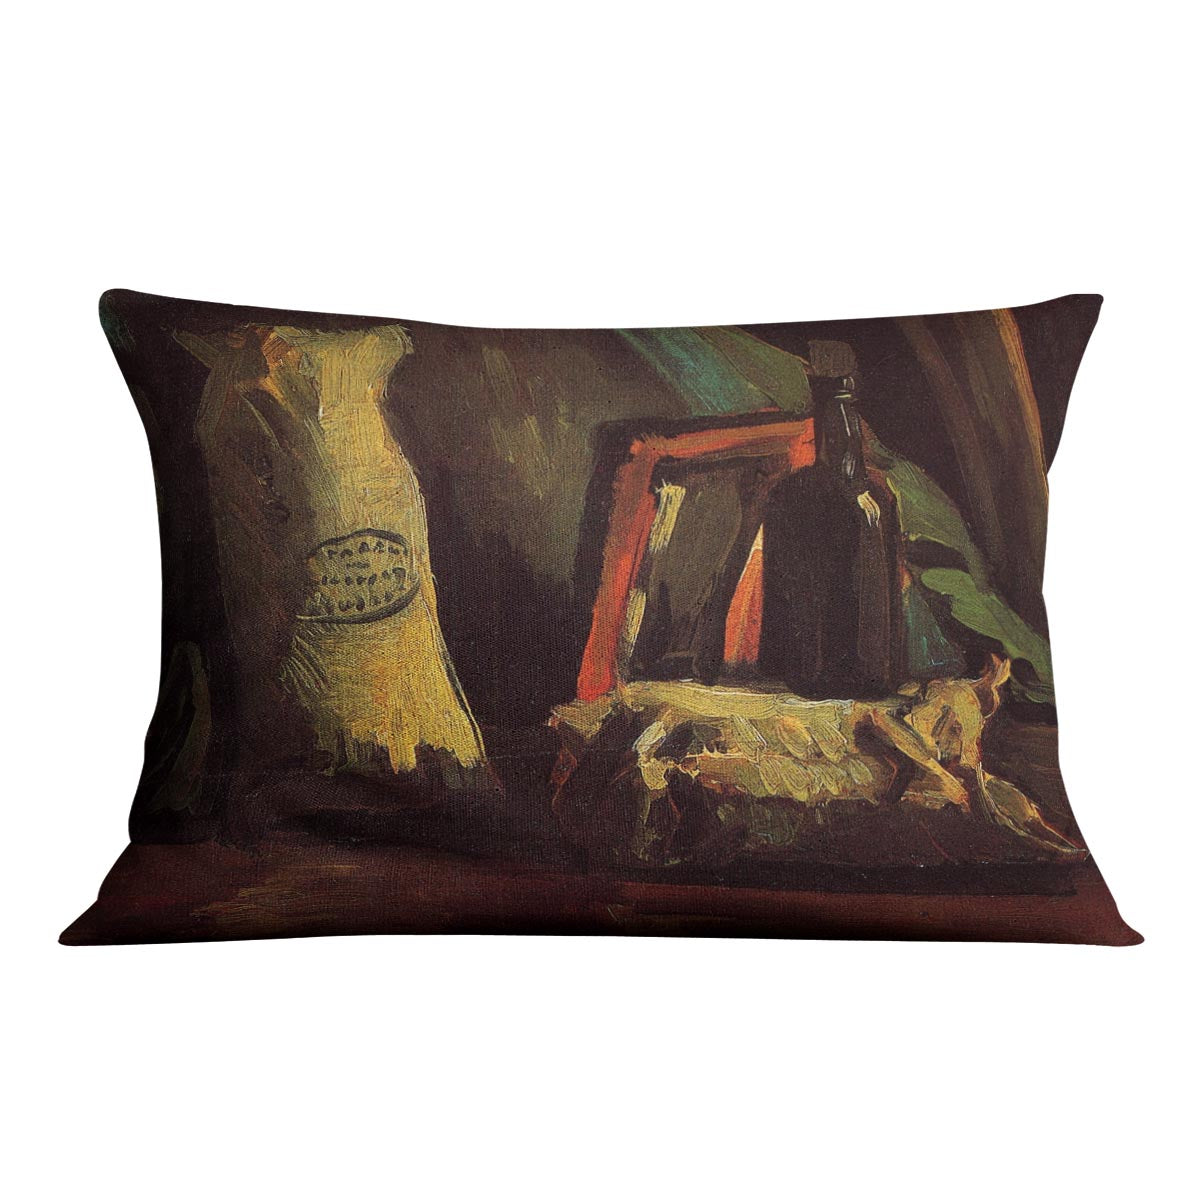 Still Life with Two Sacks and a Bottl by Van Gogh Cushion